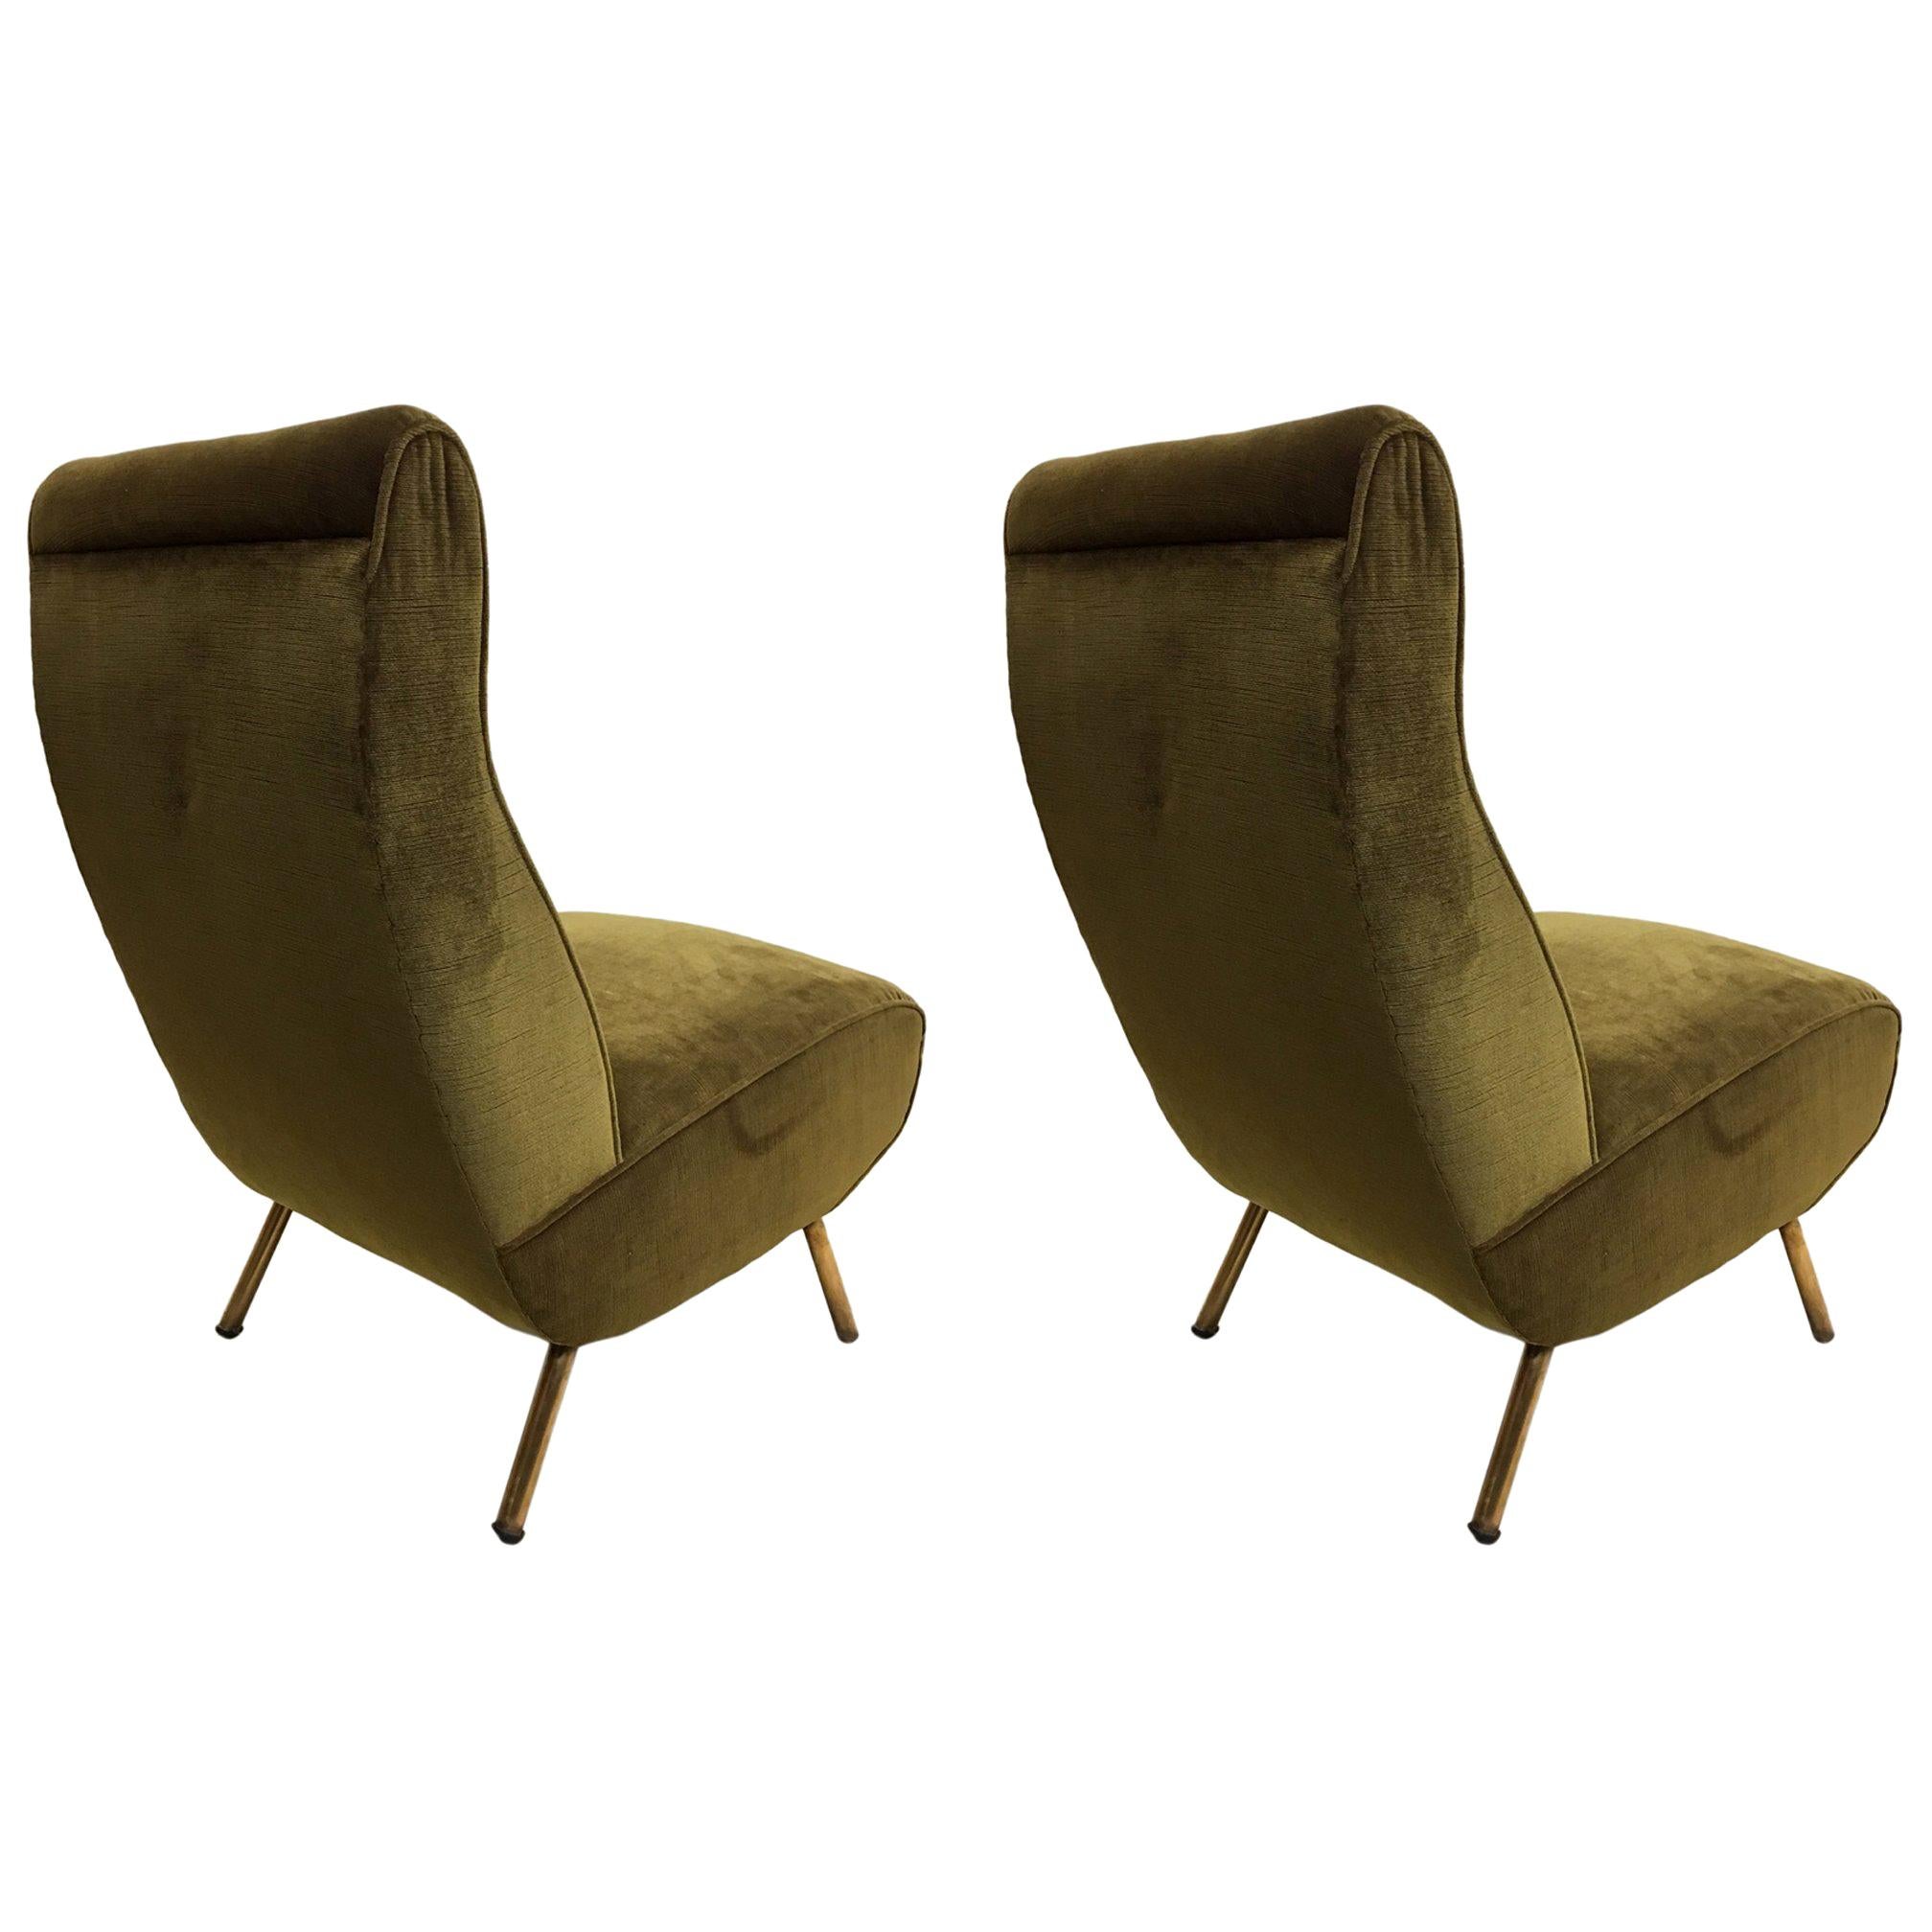 Rare Pair of Mid-Century Modern Triennale Lounge Chairs, Marco Zanuso Italy 1951